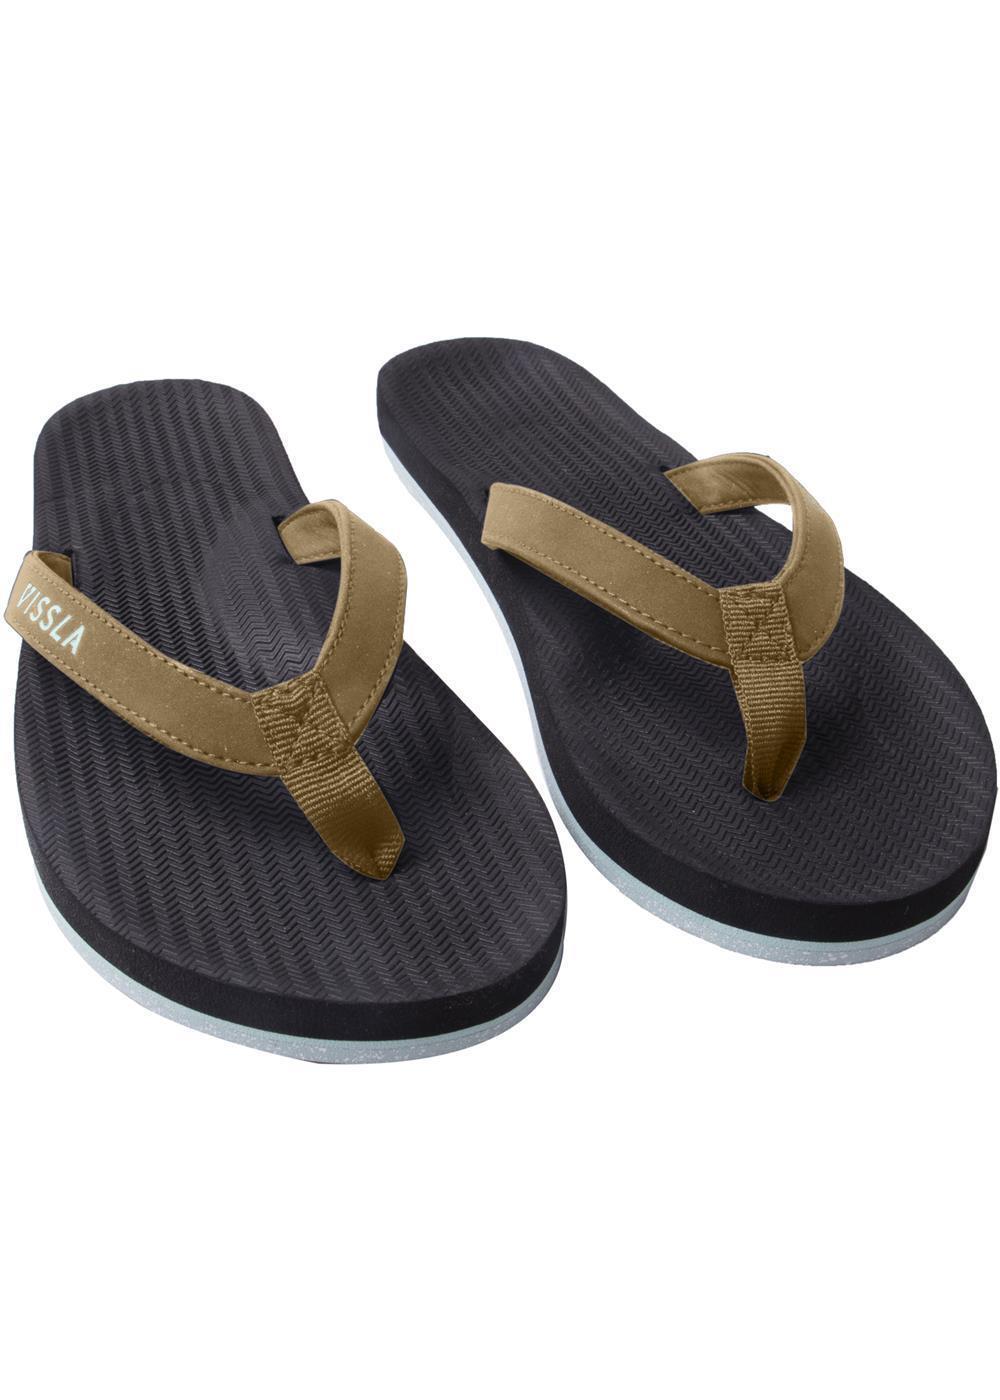 Vissla Sandals with a Black Sole and Brown Toe Thong - Front View